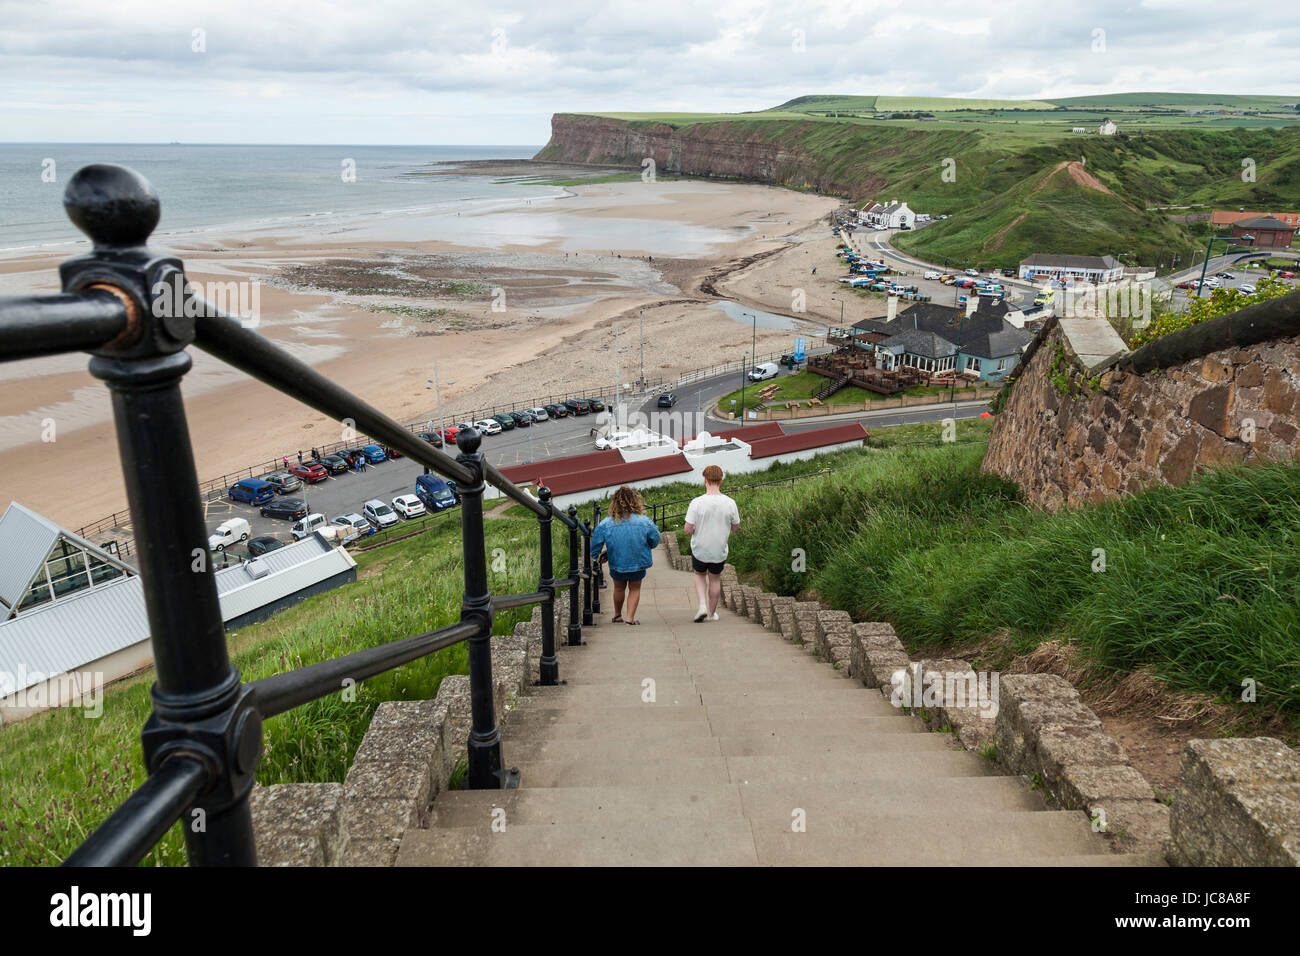 A man and woman walk down the steep steps to the beach area at Saltburn by the Sea, England, UK Stock Photo